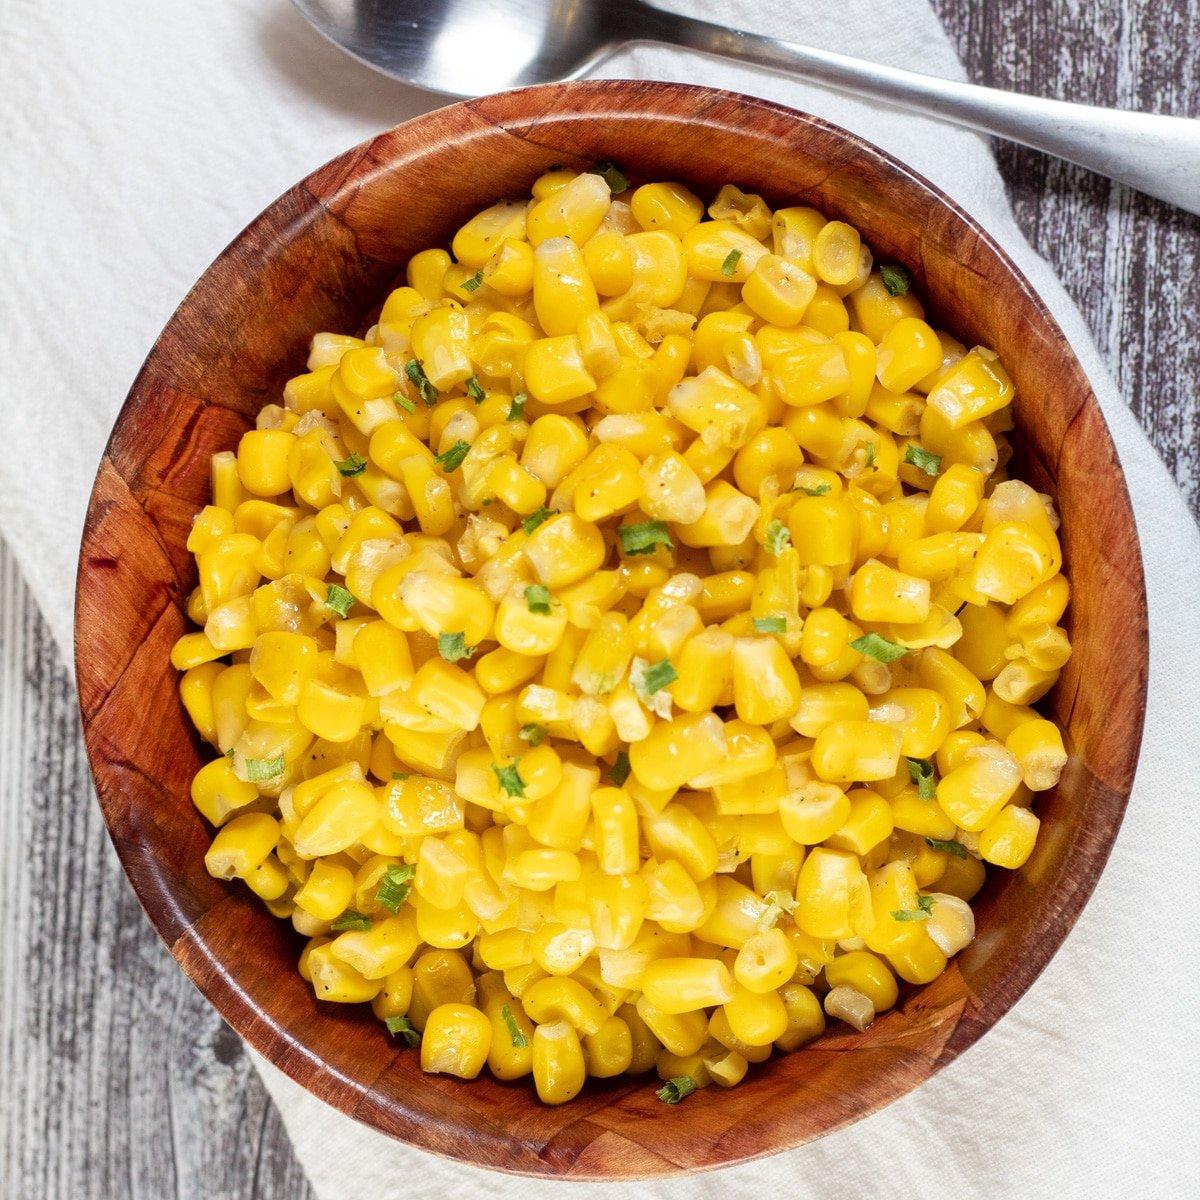 Square image showing cooked canned corn in a wooden bowl.